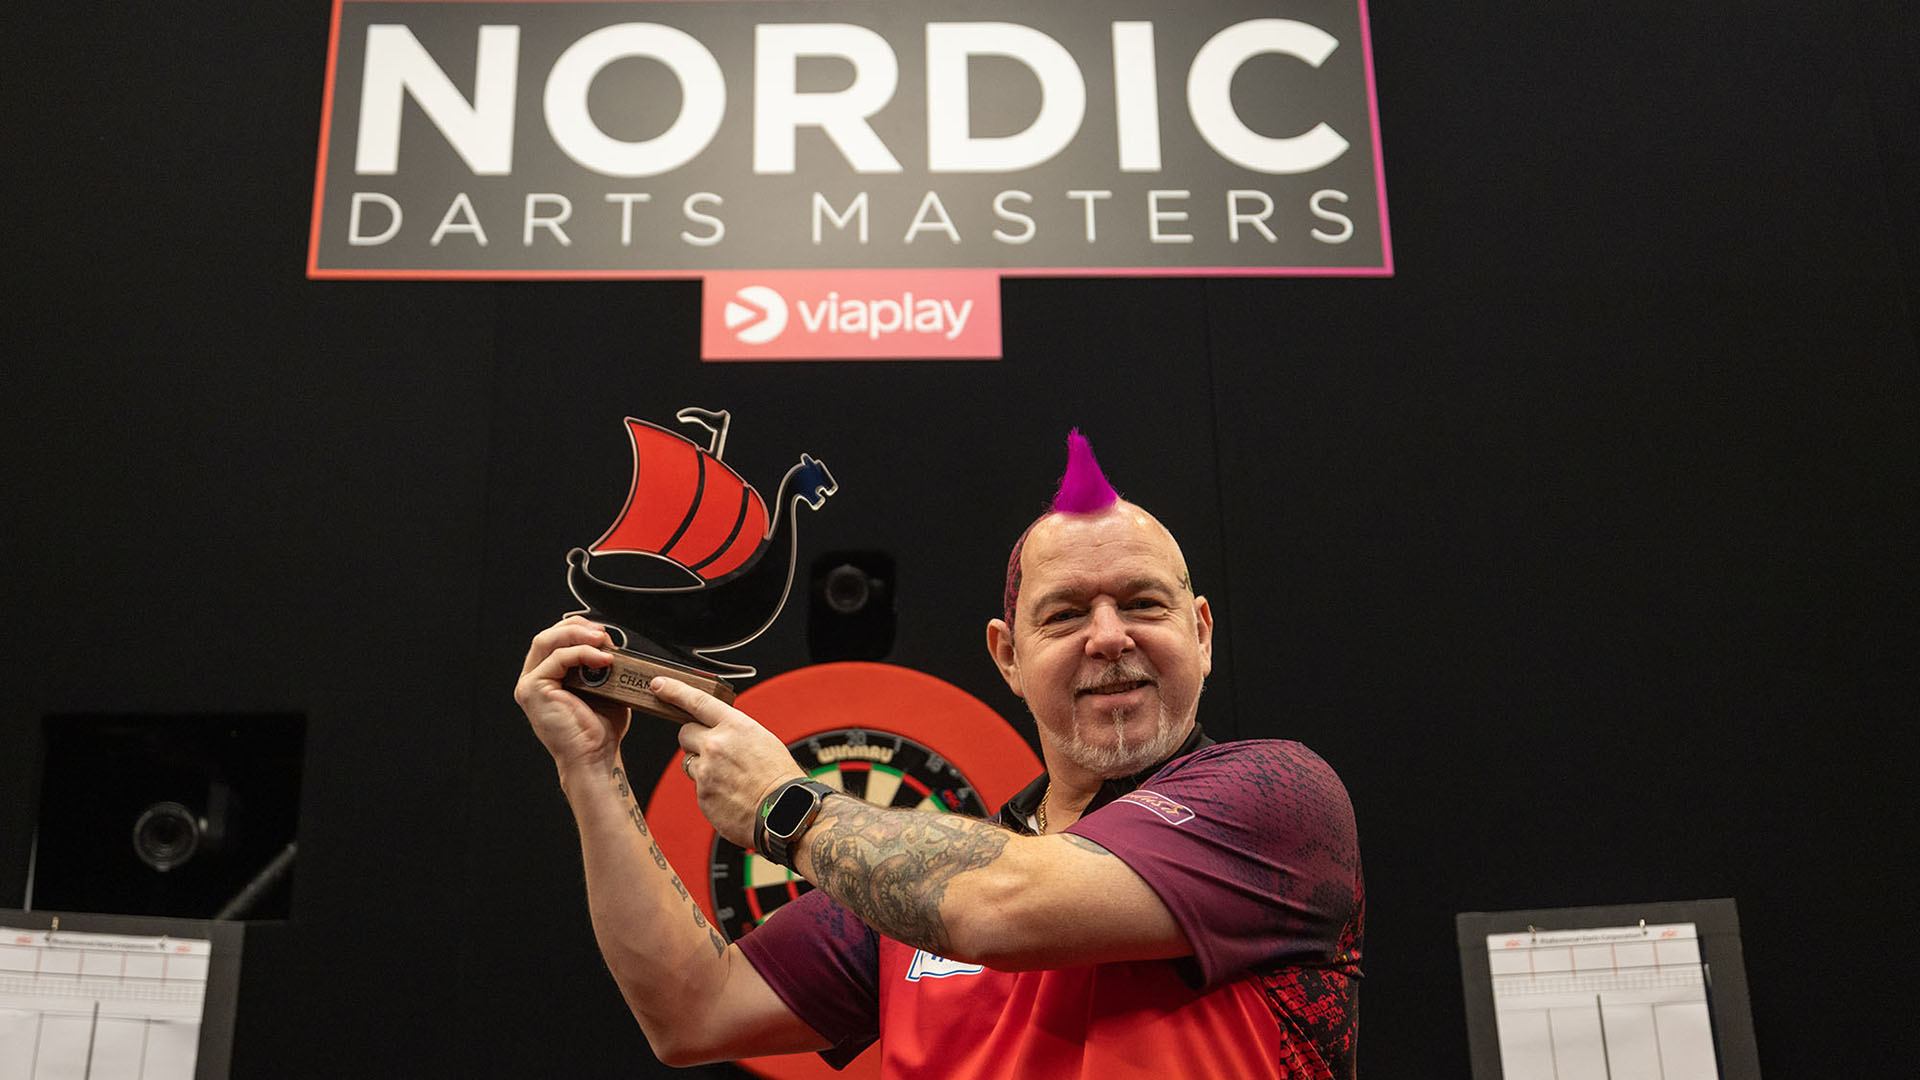 Nordic Darts Masters 2023 Draw, schedule, results, odds and TV coverage details